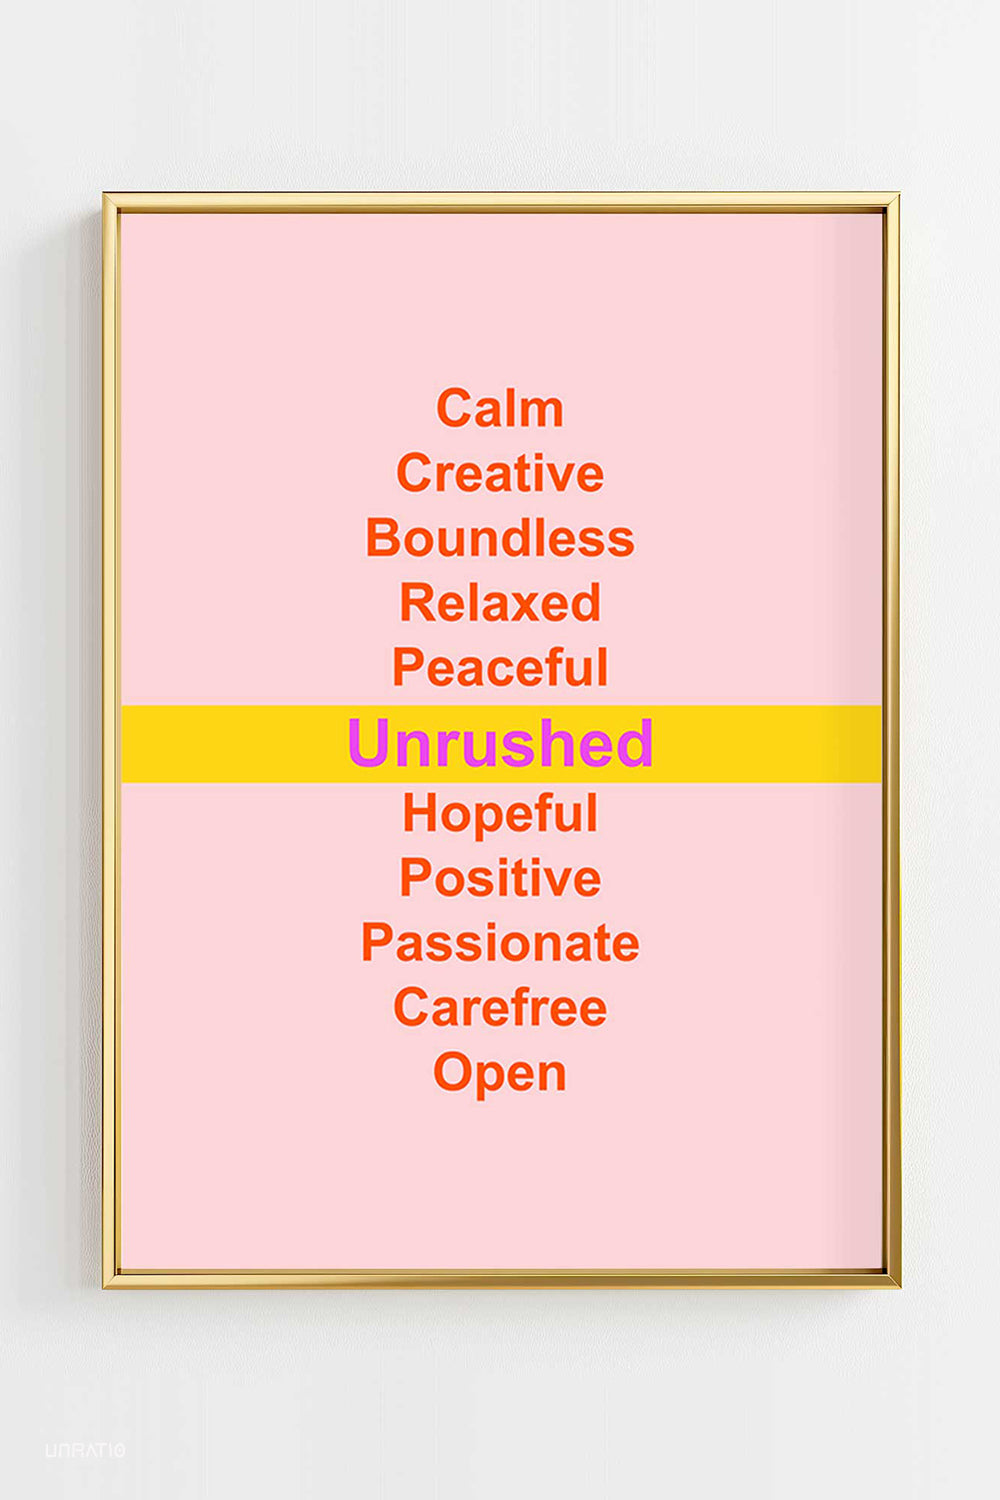 Framed typography poster with inspirational words like 'Calm', 'Unrushed', 'Hopeful', on a pink background, promoting mindfulness and positivity.